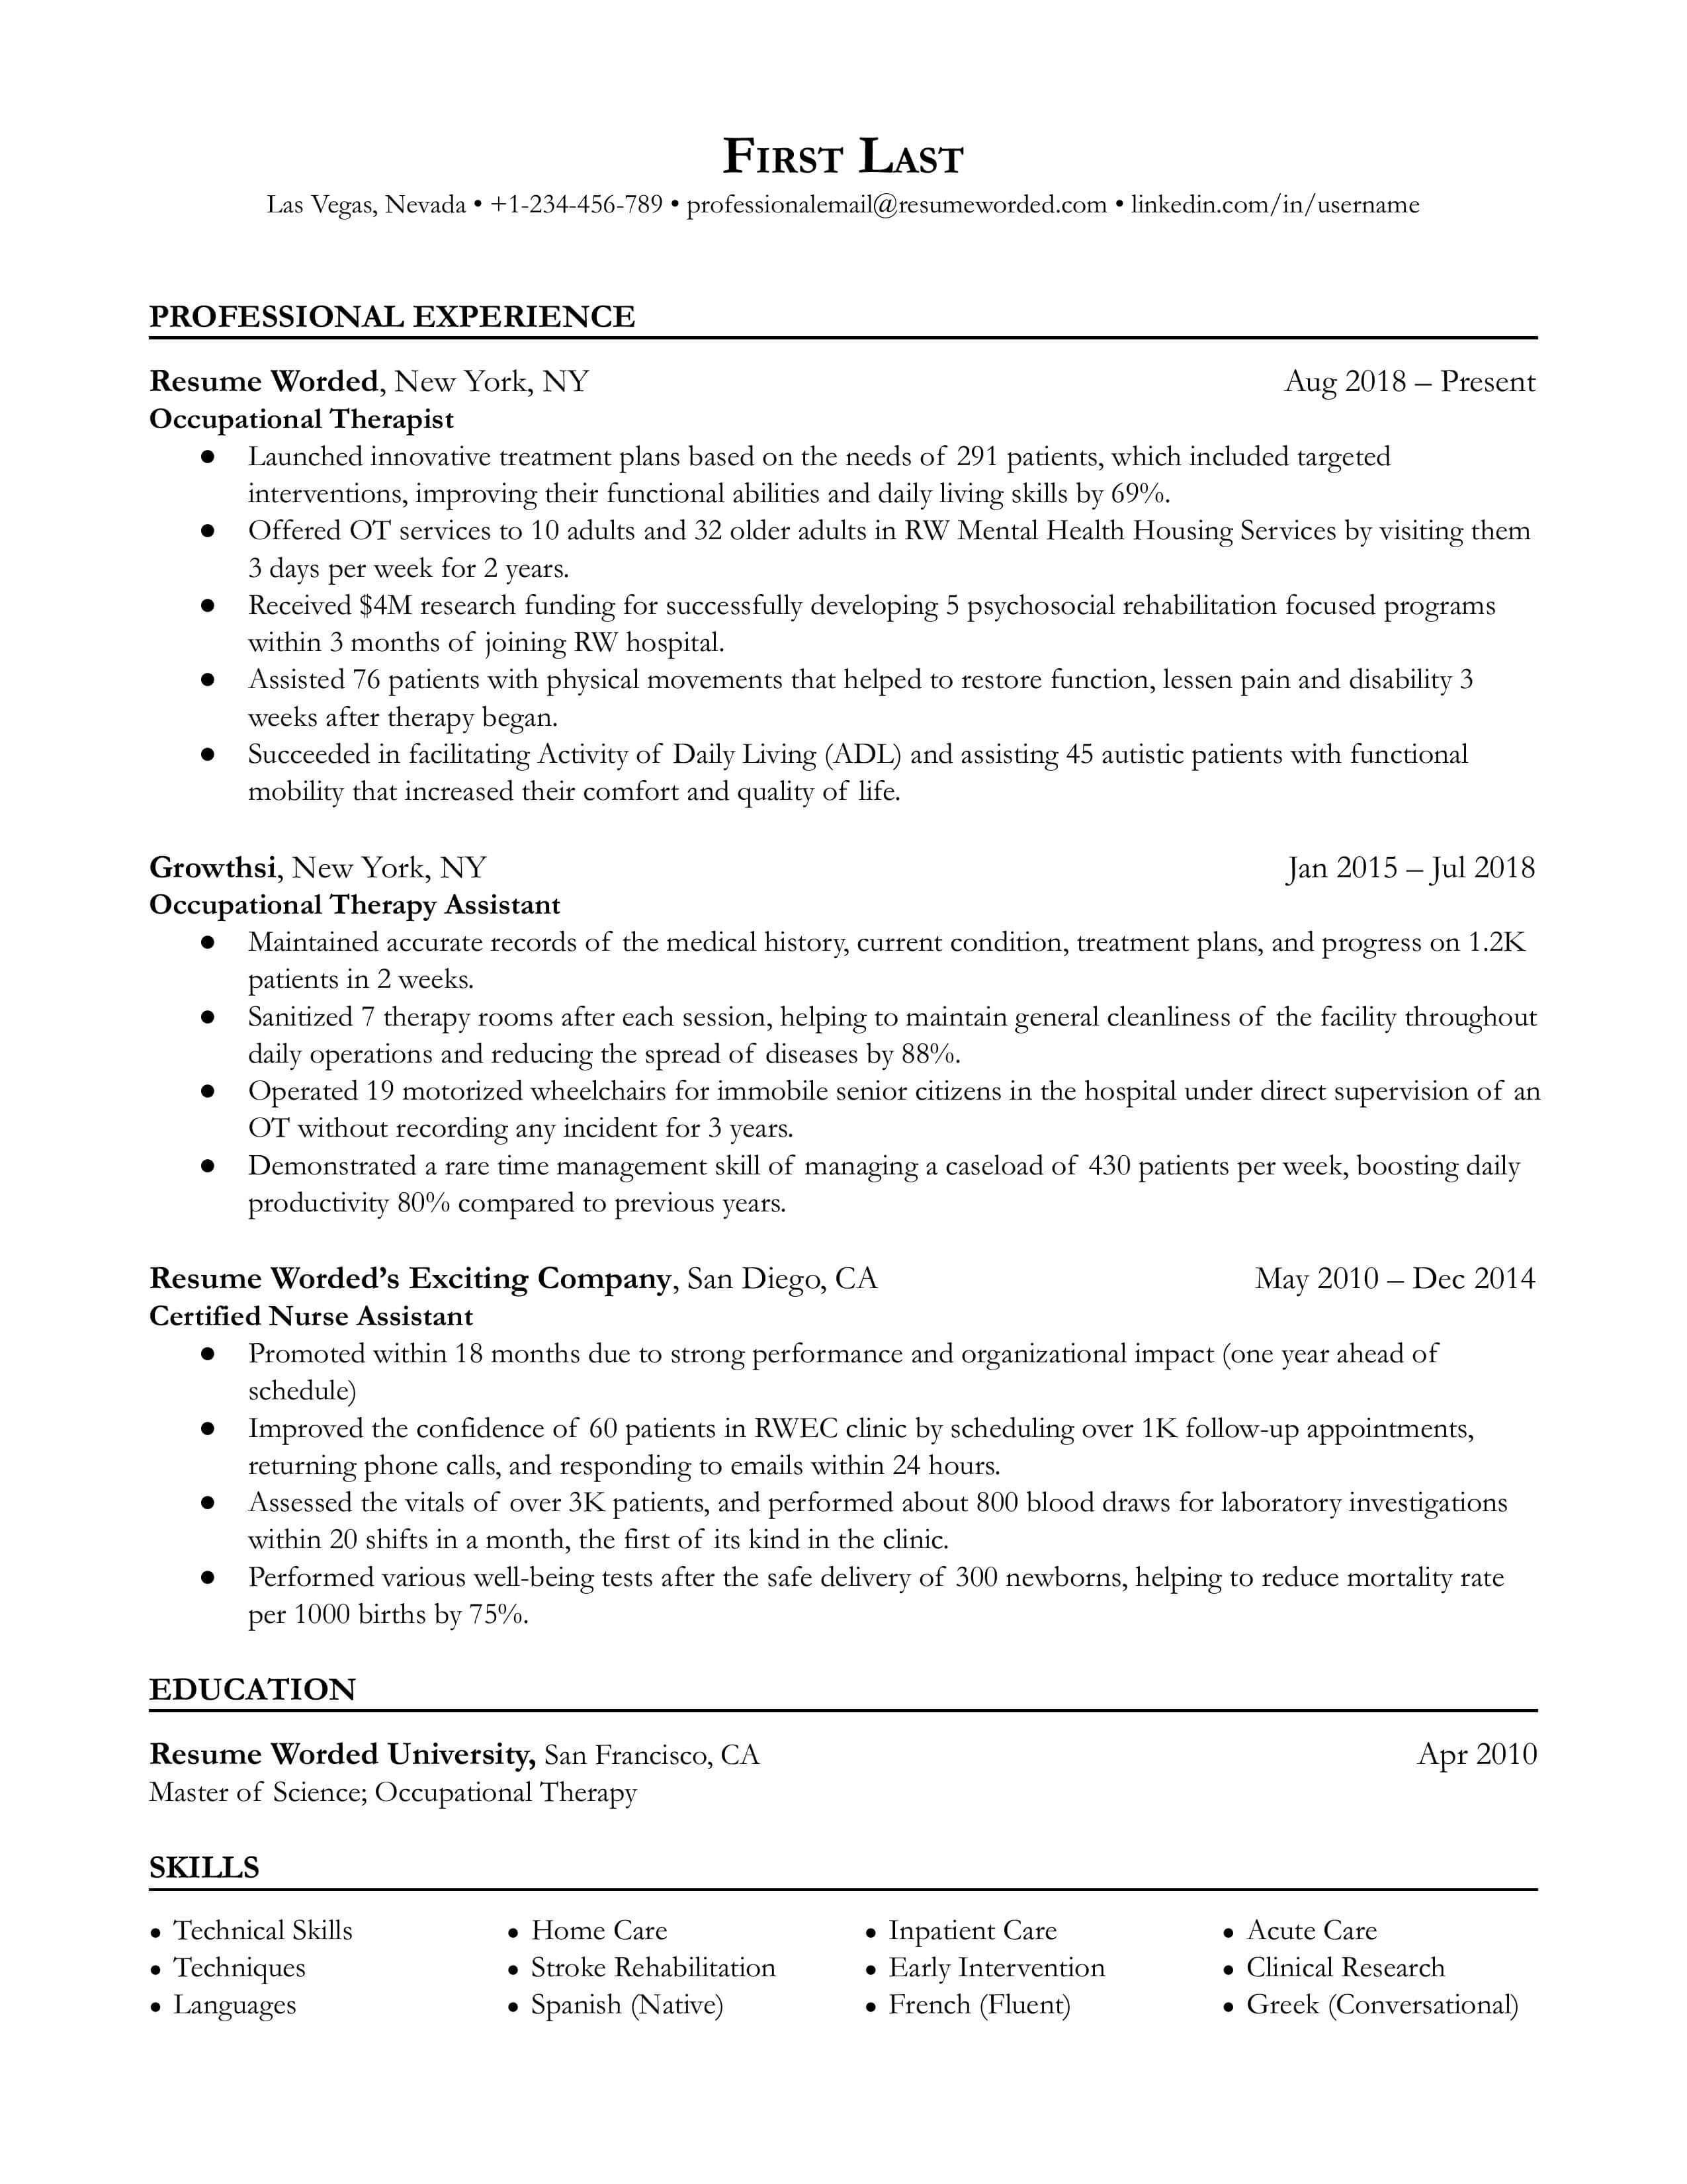 A resume for an occupational therapist with a masters degree in occupational therapy and experience as a occupational therapy assistant.